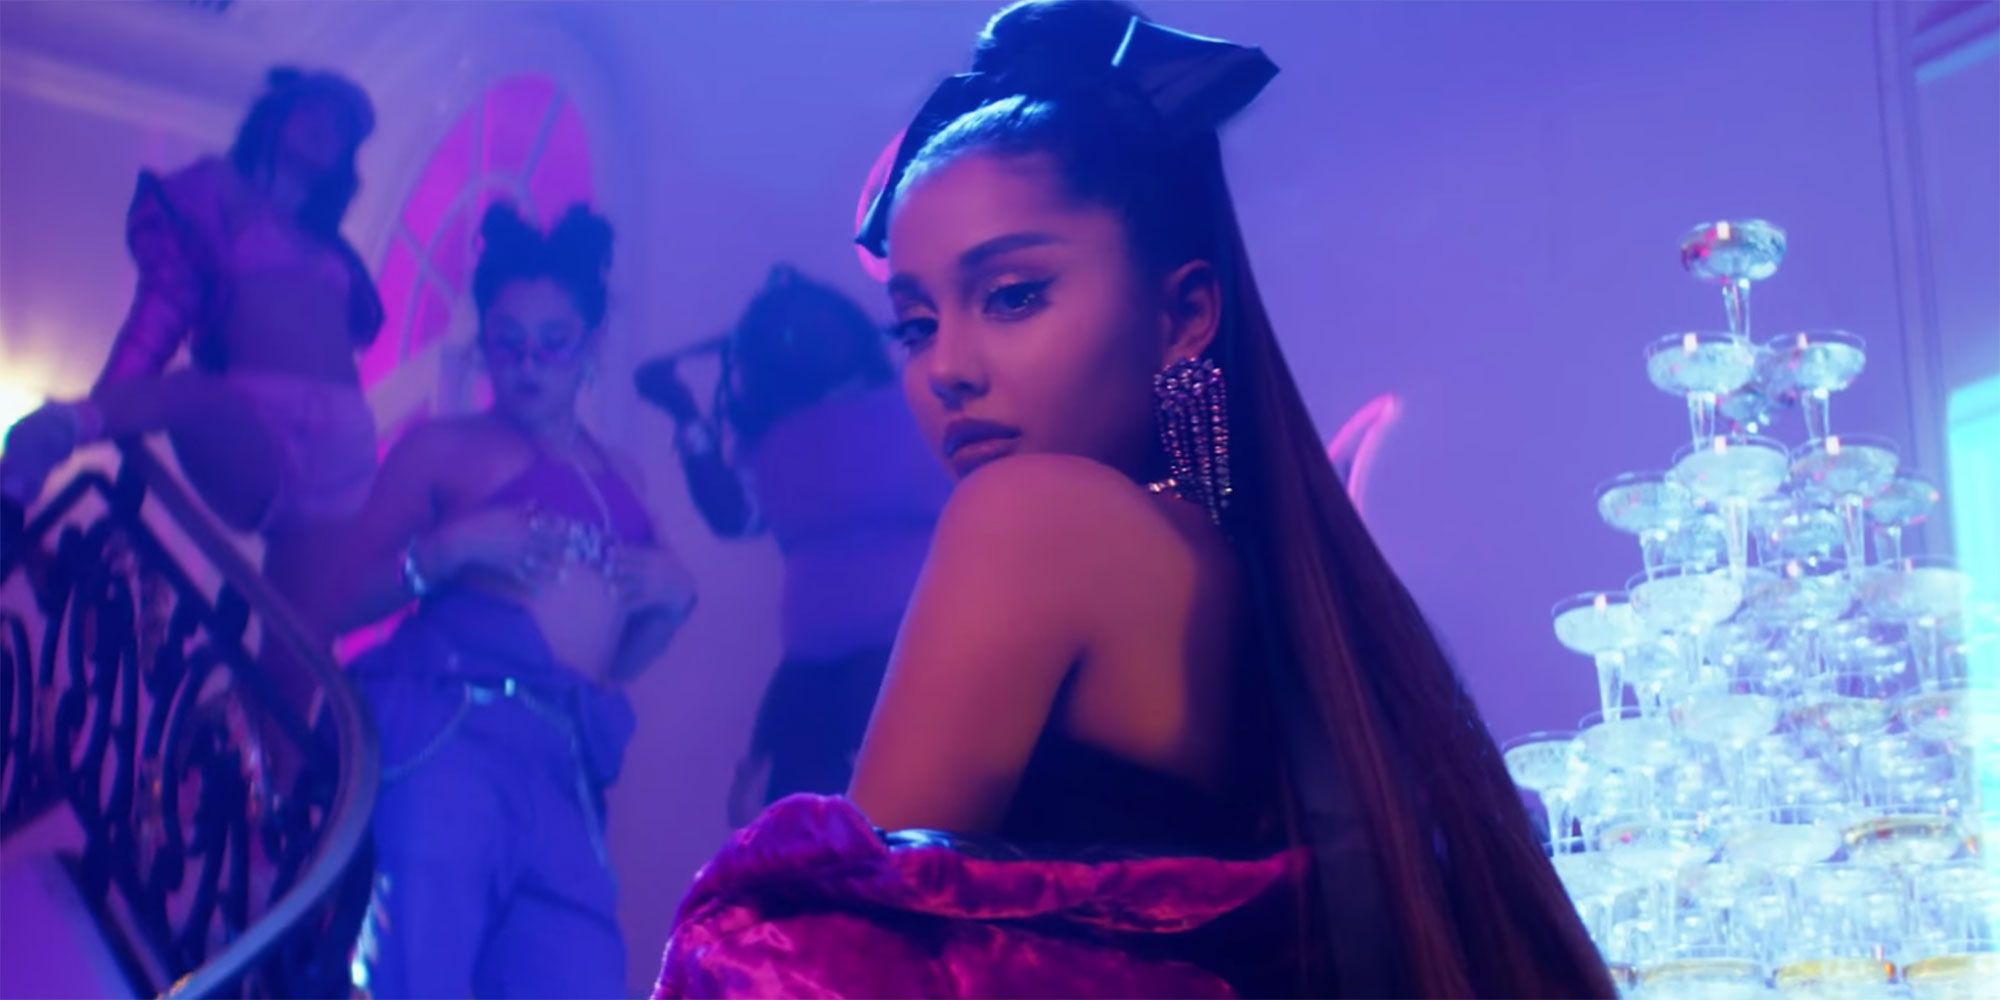 What Ariana Grande S 7 Rings Song Lyrics Really Mean Enter the password that accompanies your username. ariana grande s 7 rings song lyrics